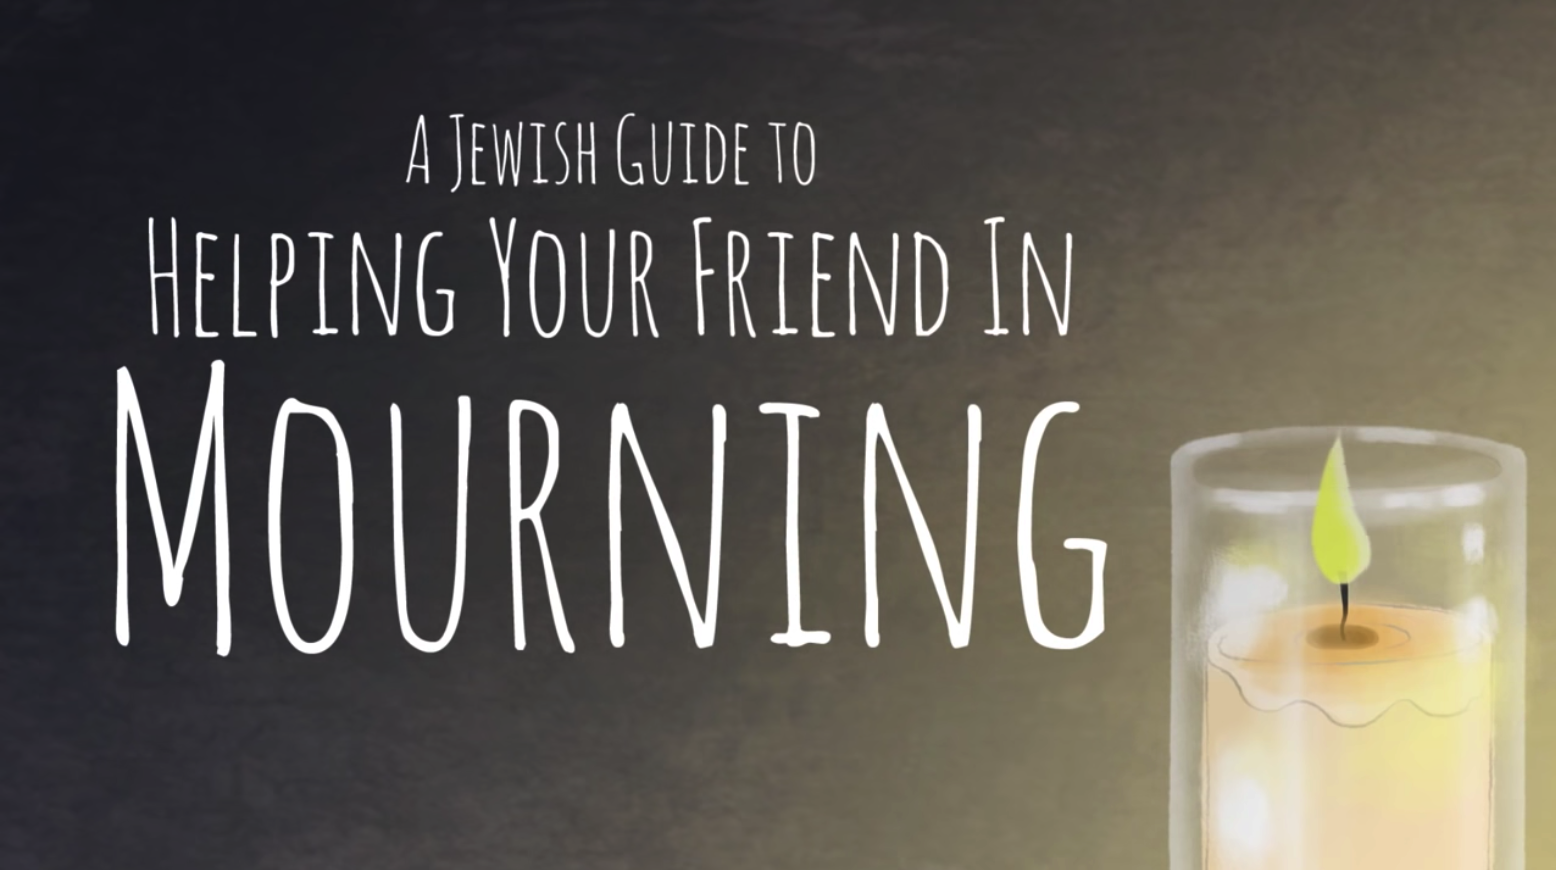 jewish-guide-to-helping-your-friend-in-mourning-screen-shot